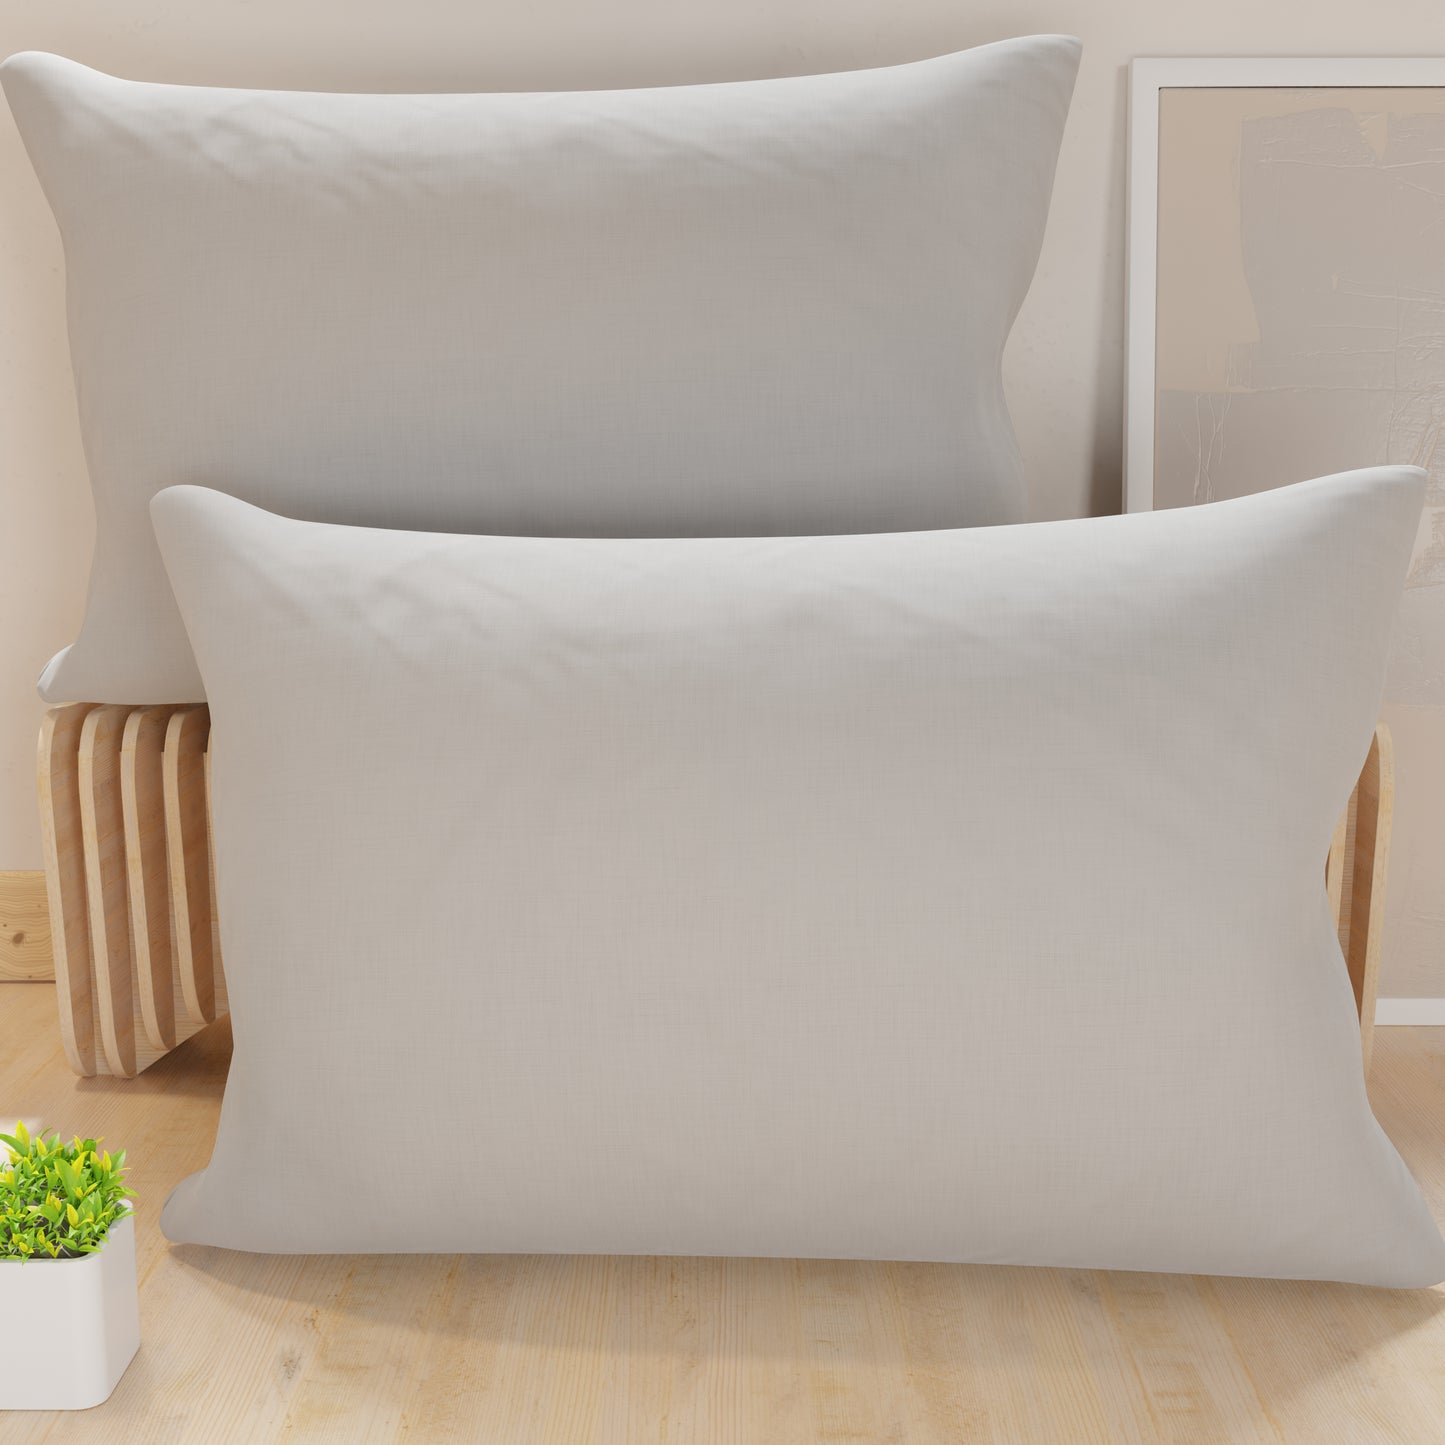 Pillowcases, Pair of Pillowcases, Cushion Covers, 100% Hypoallergenic Microfiber, Light Grey